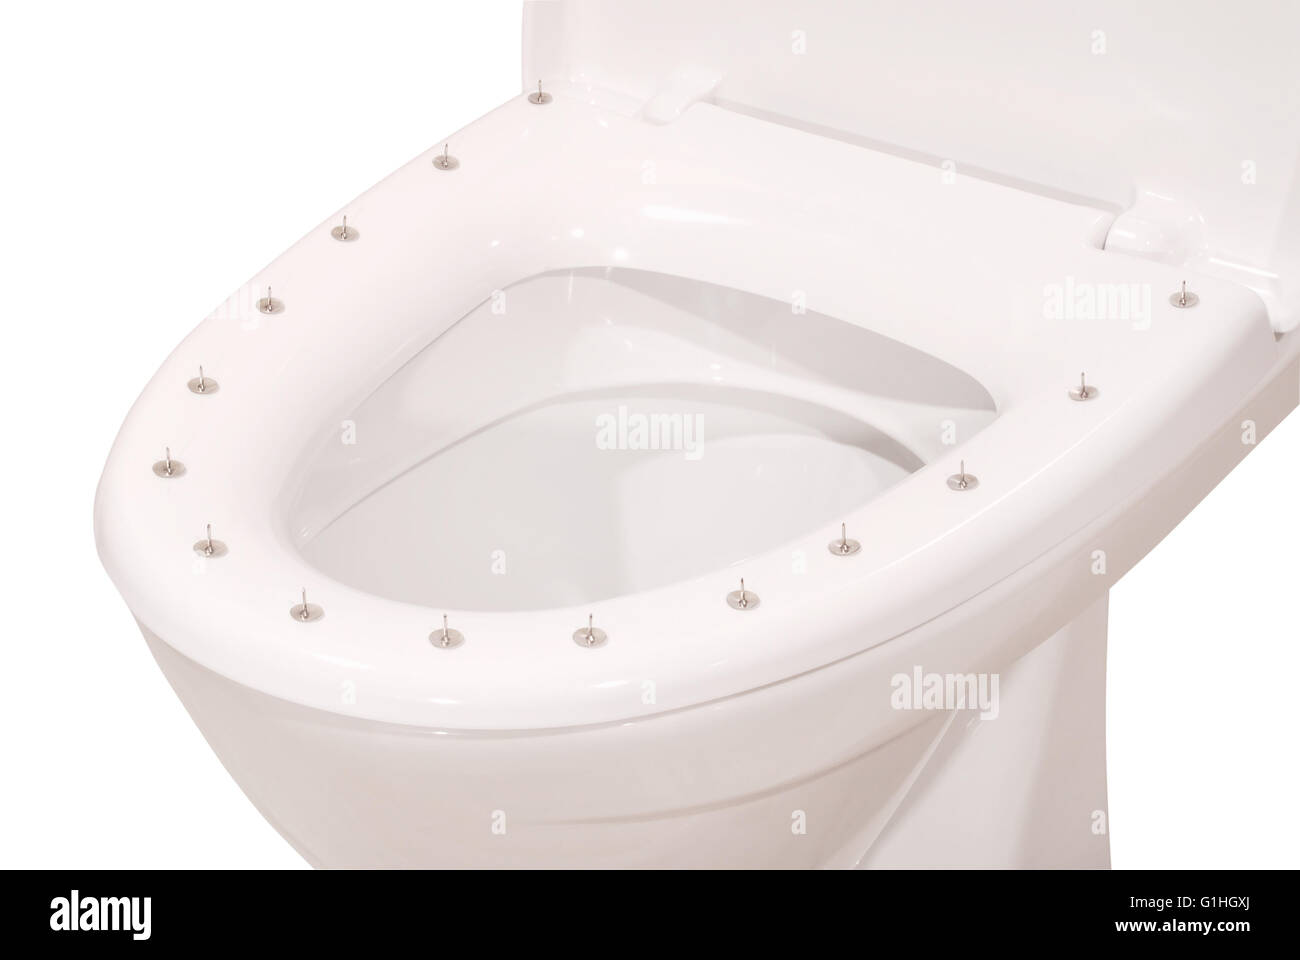 Thumbtacks on the lid of the toilet on white. Clipping path included. Stock Photo